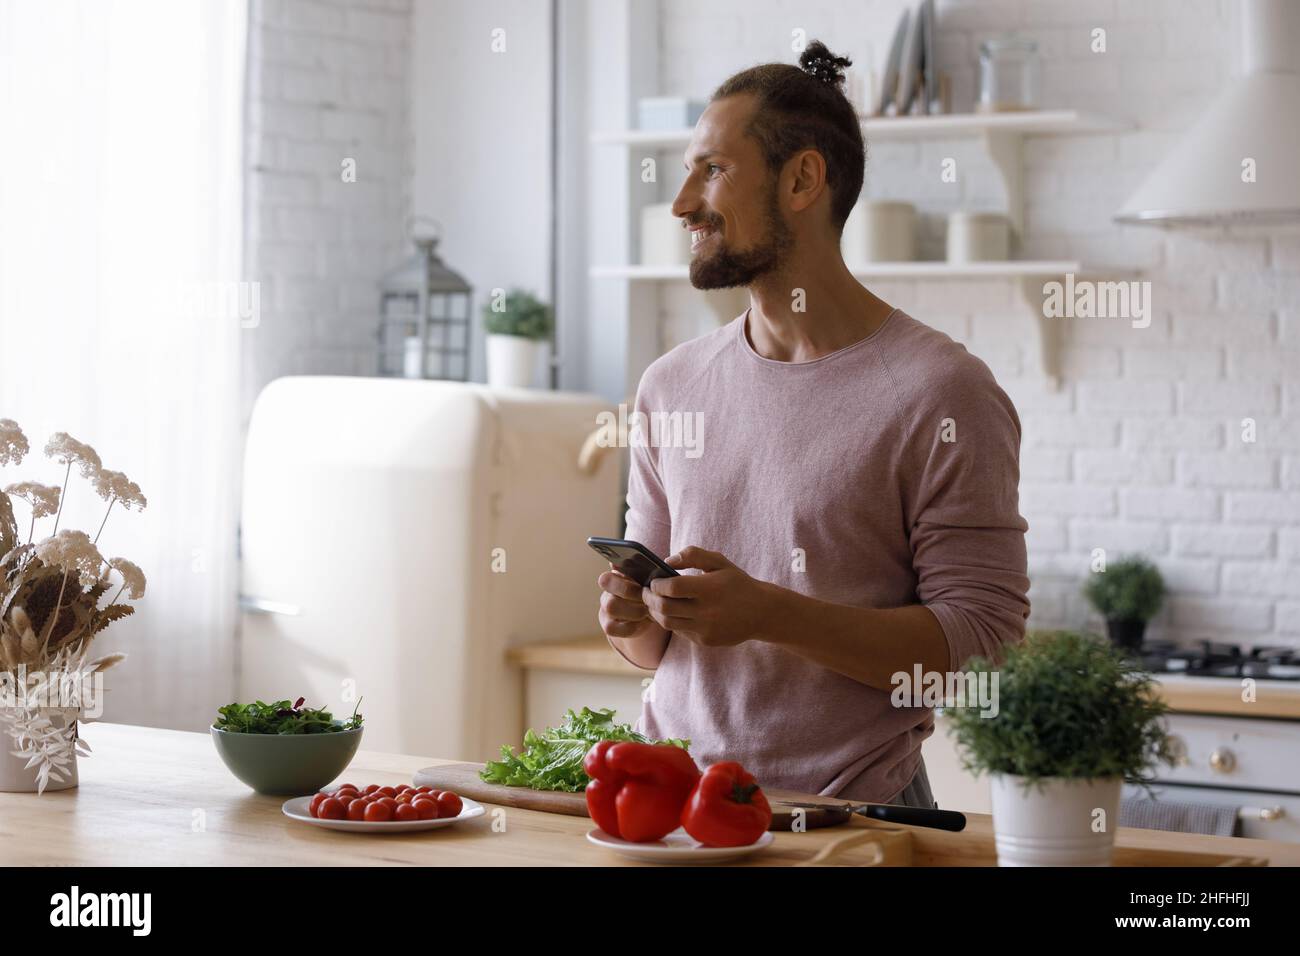 Happy young man using cellphone, preparing food. Stock Photo